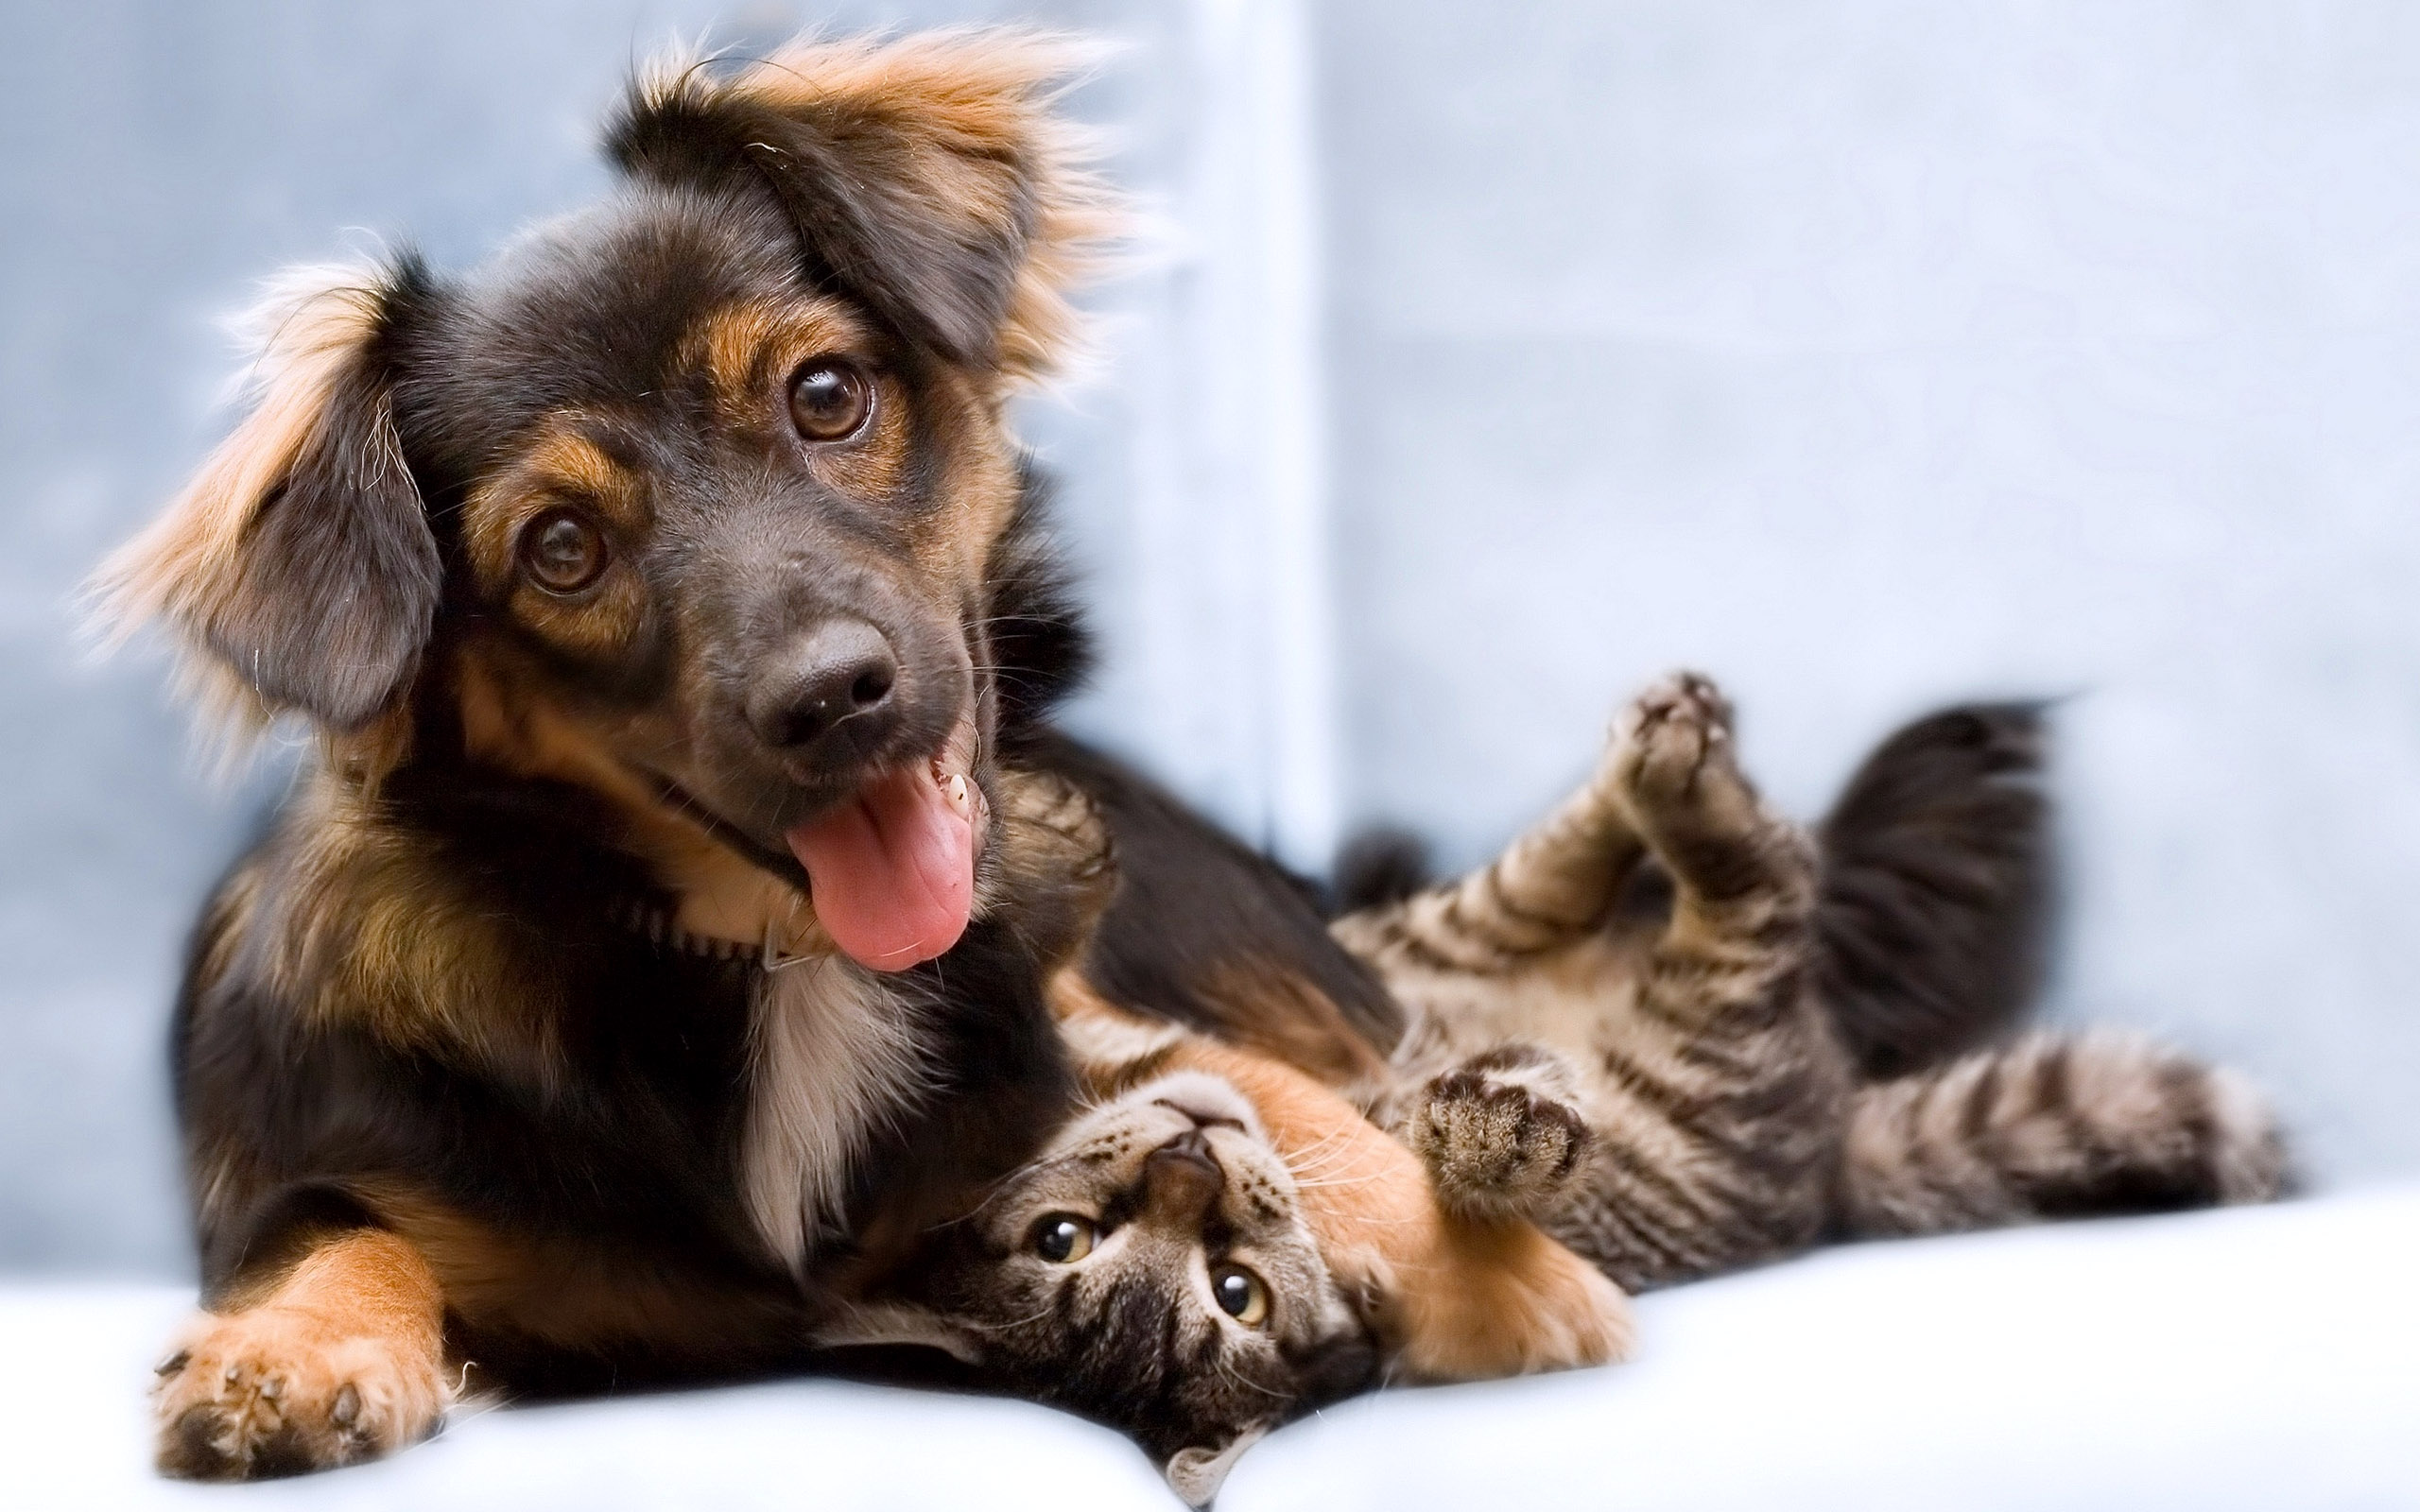 Funny Cat And Dog Friend Wallpaper